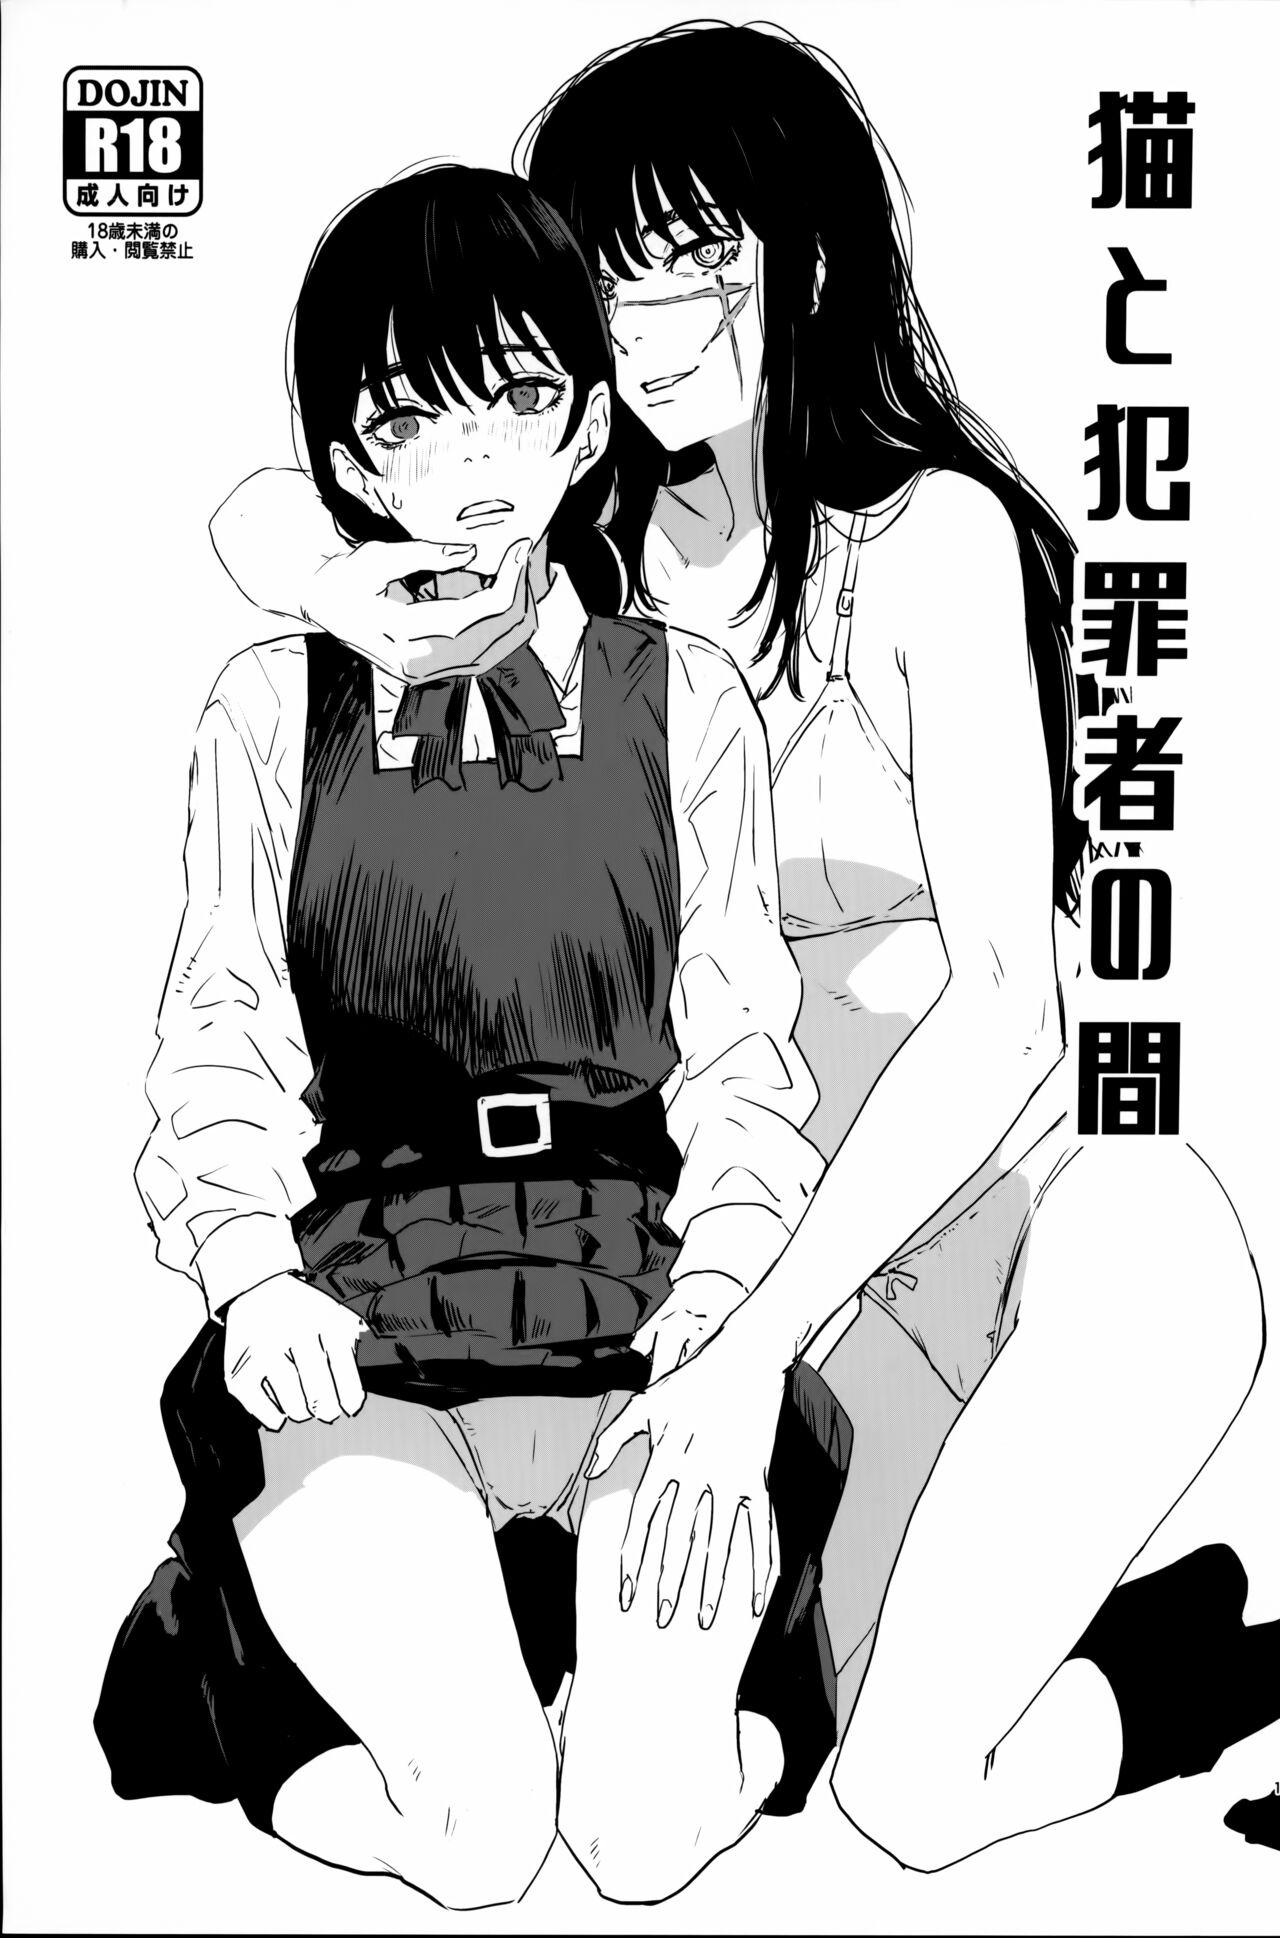 Culazo 猫と犯罪者の間 - Chainsaw man Wives - Picture 1